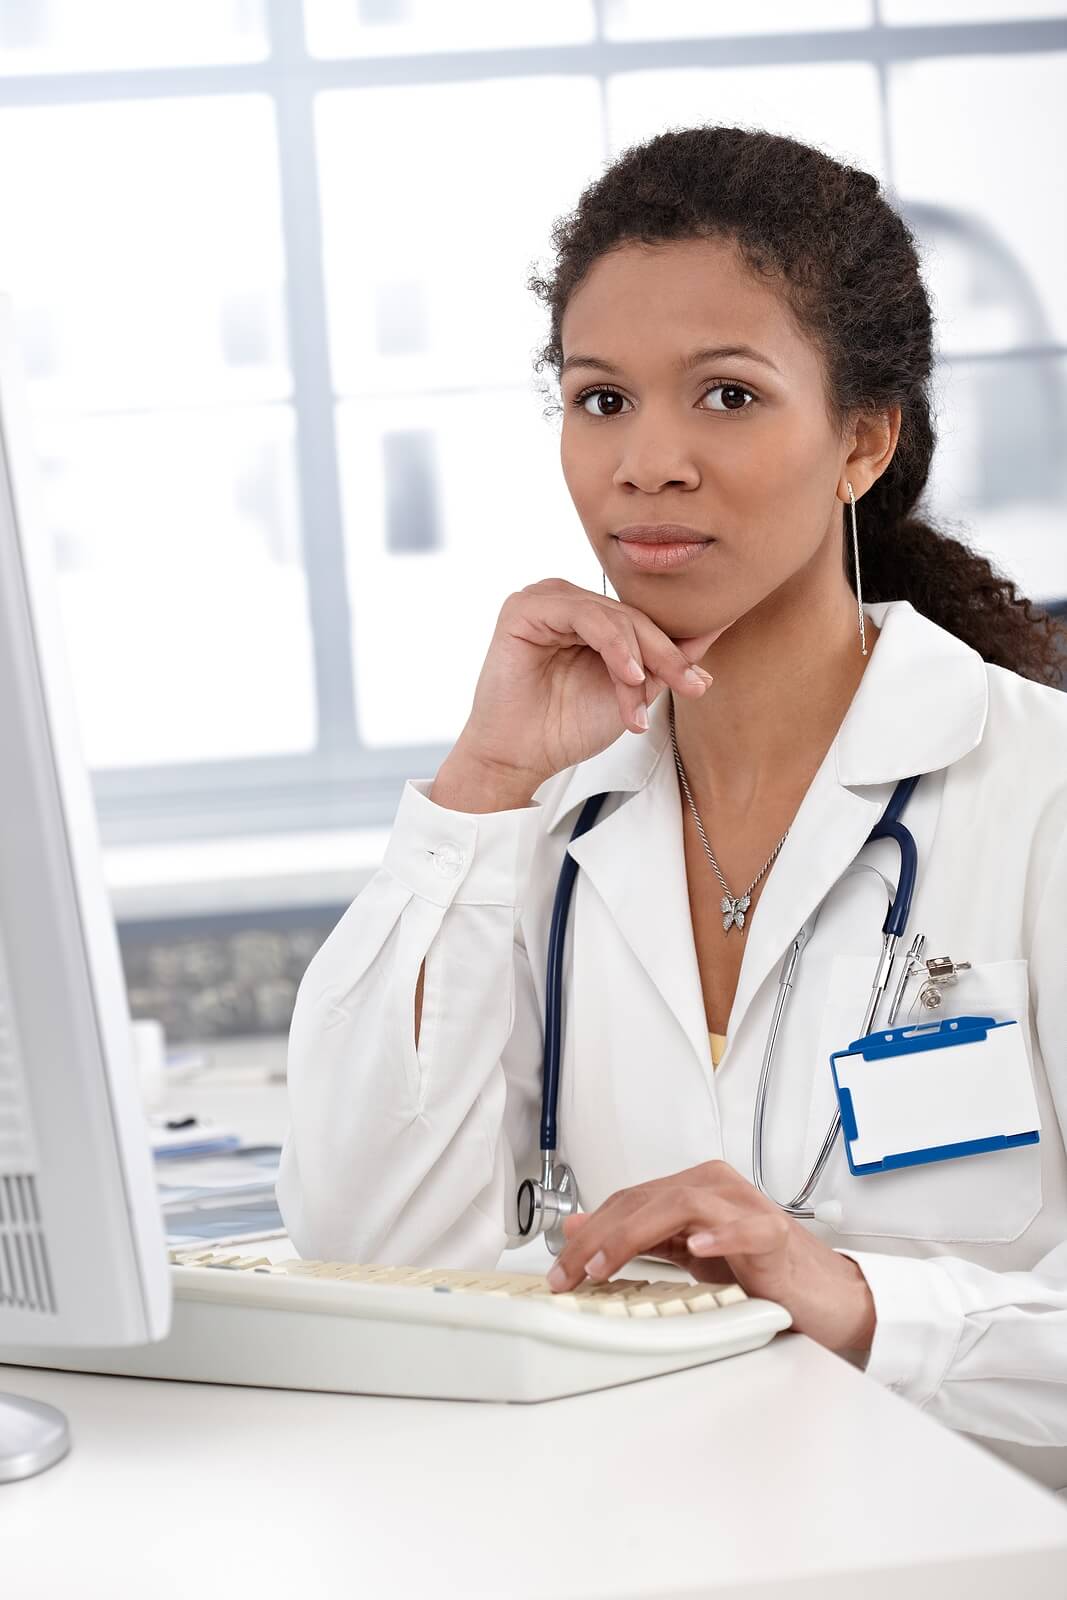 A woman doctor sits at a computer. Looking to learn more about SEO as a functional medicine doctor? Our SEO services can help your practice today!